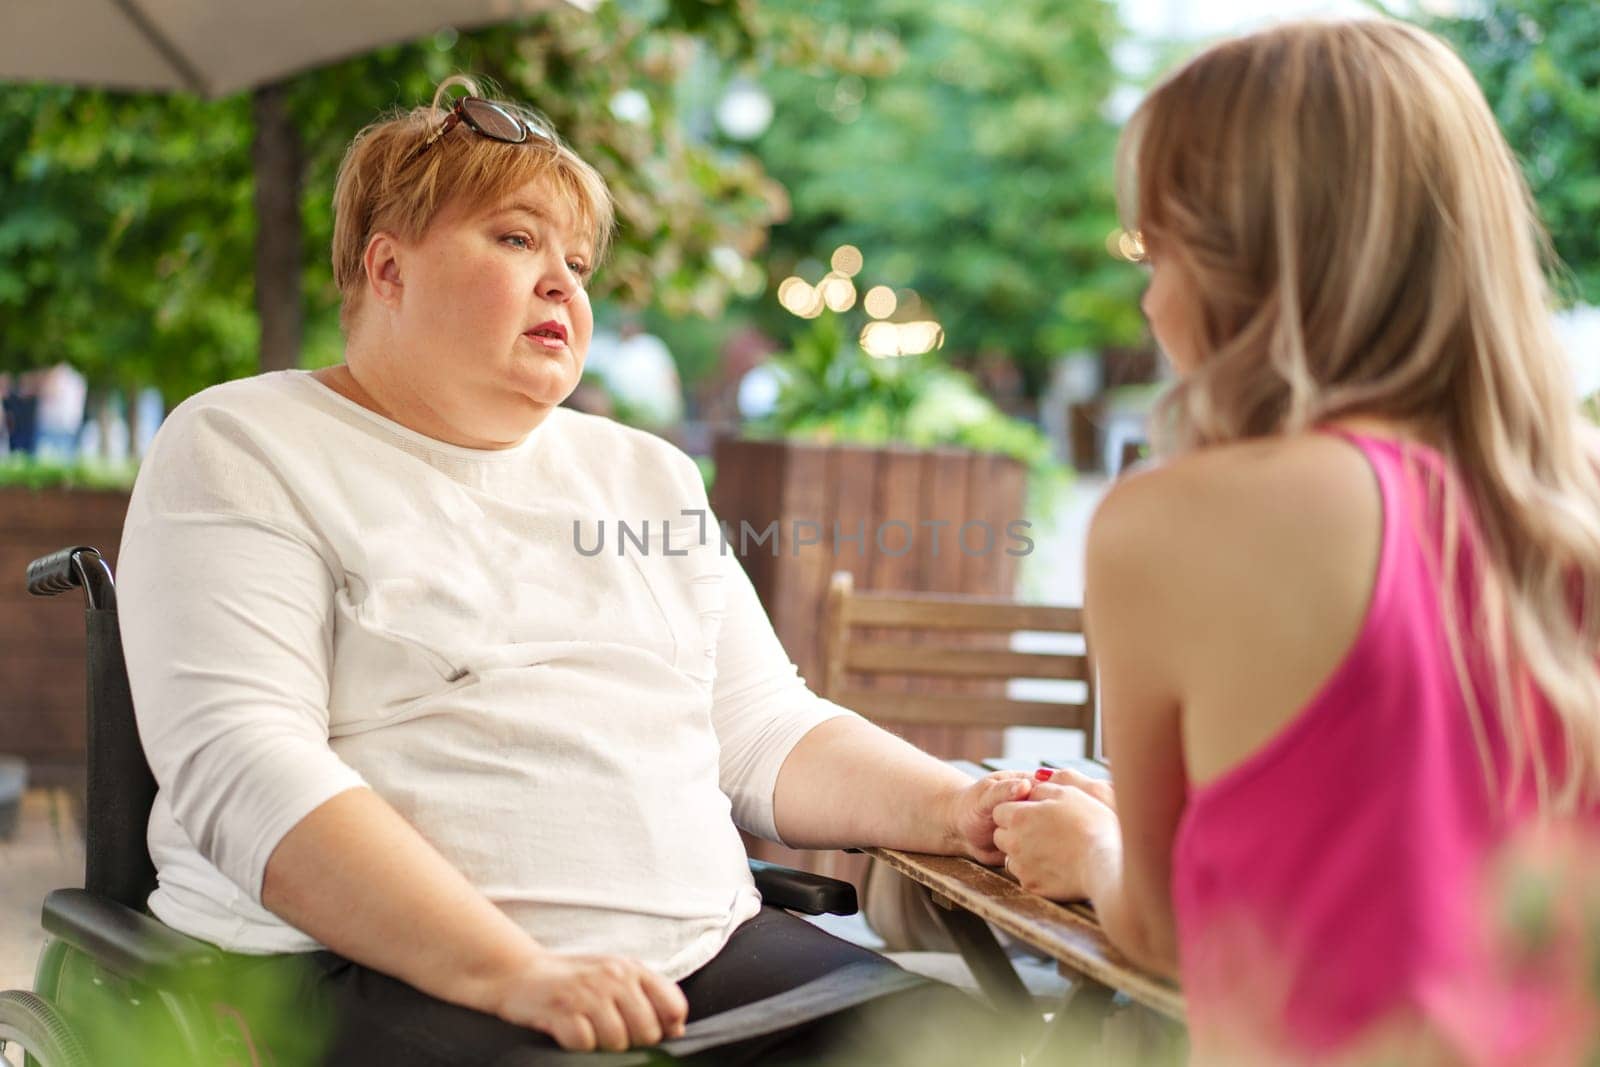 Mother with disability in wheelchair talking to her daughter while sitting at the table in cafe in the street